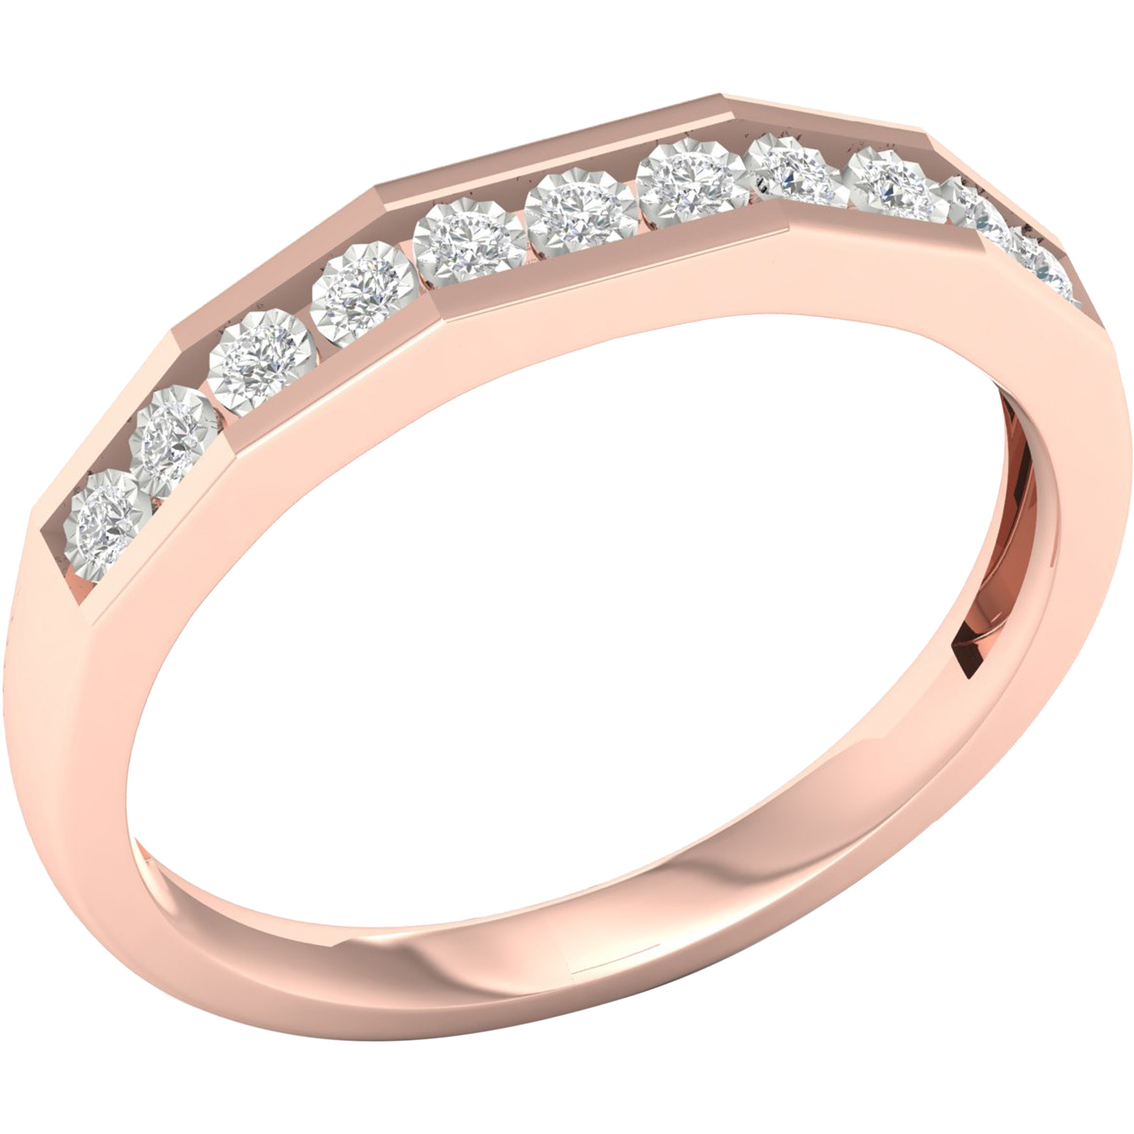 Sterling Silver 14K Rose Gold Diamond Accent Ring - Image 2 of 4